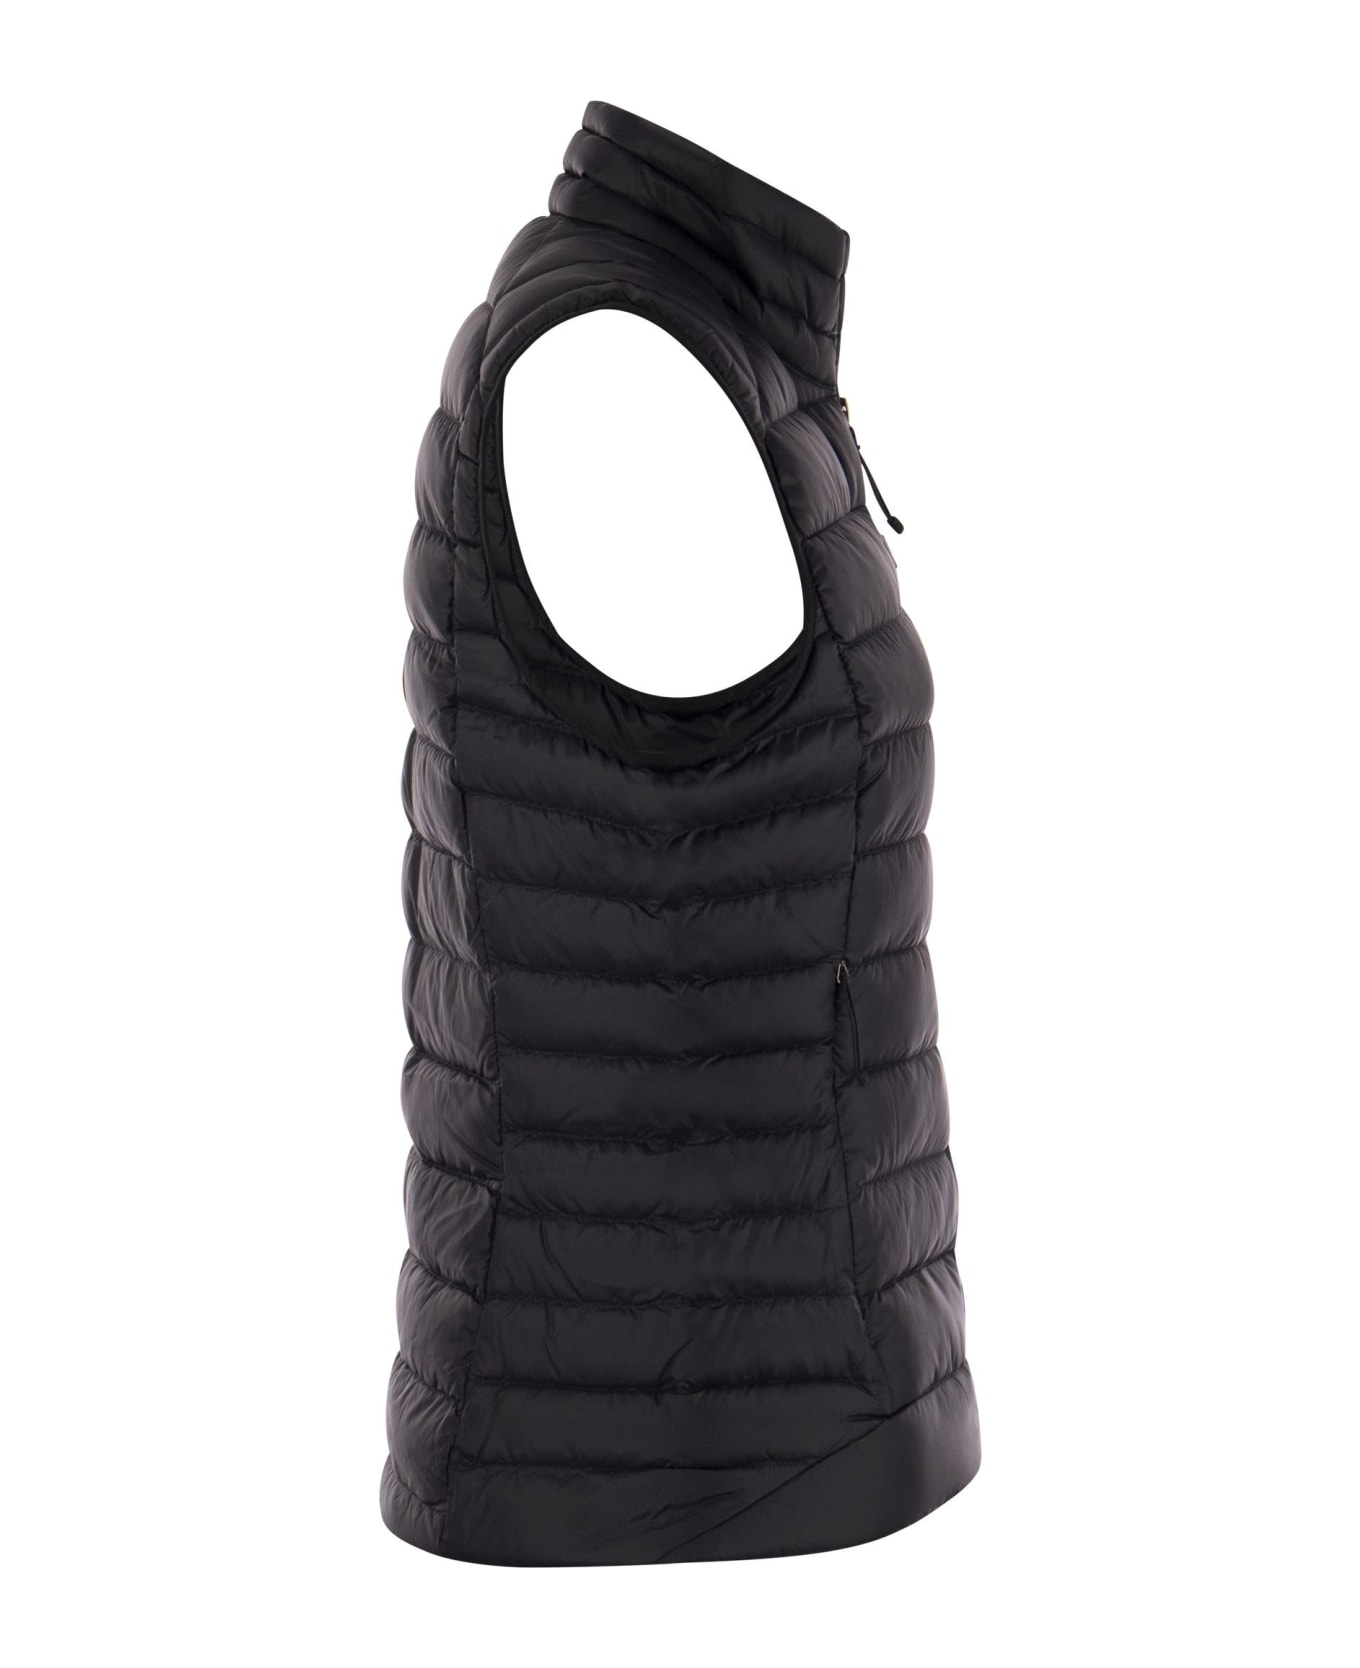 Patagonia Down Sweater Vest - Blk